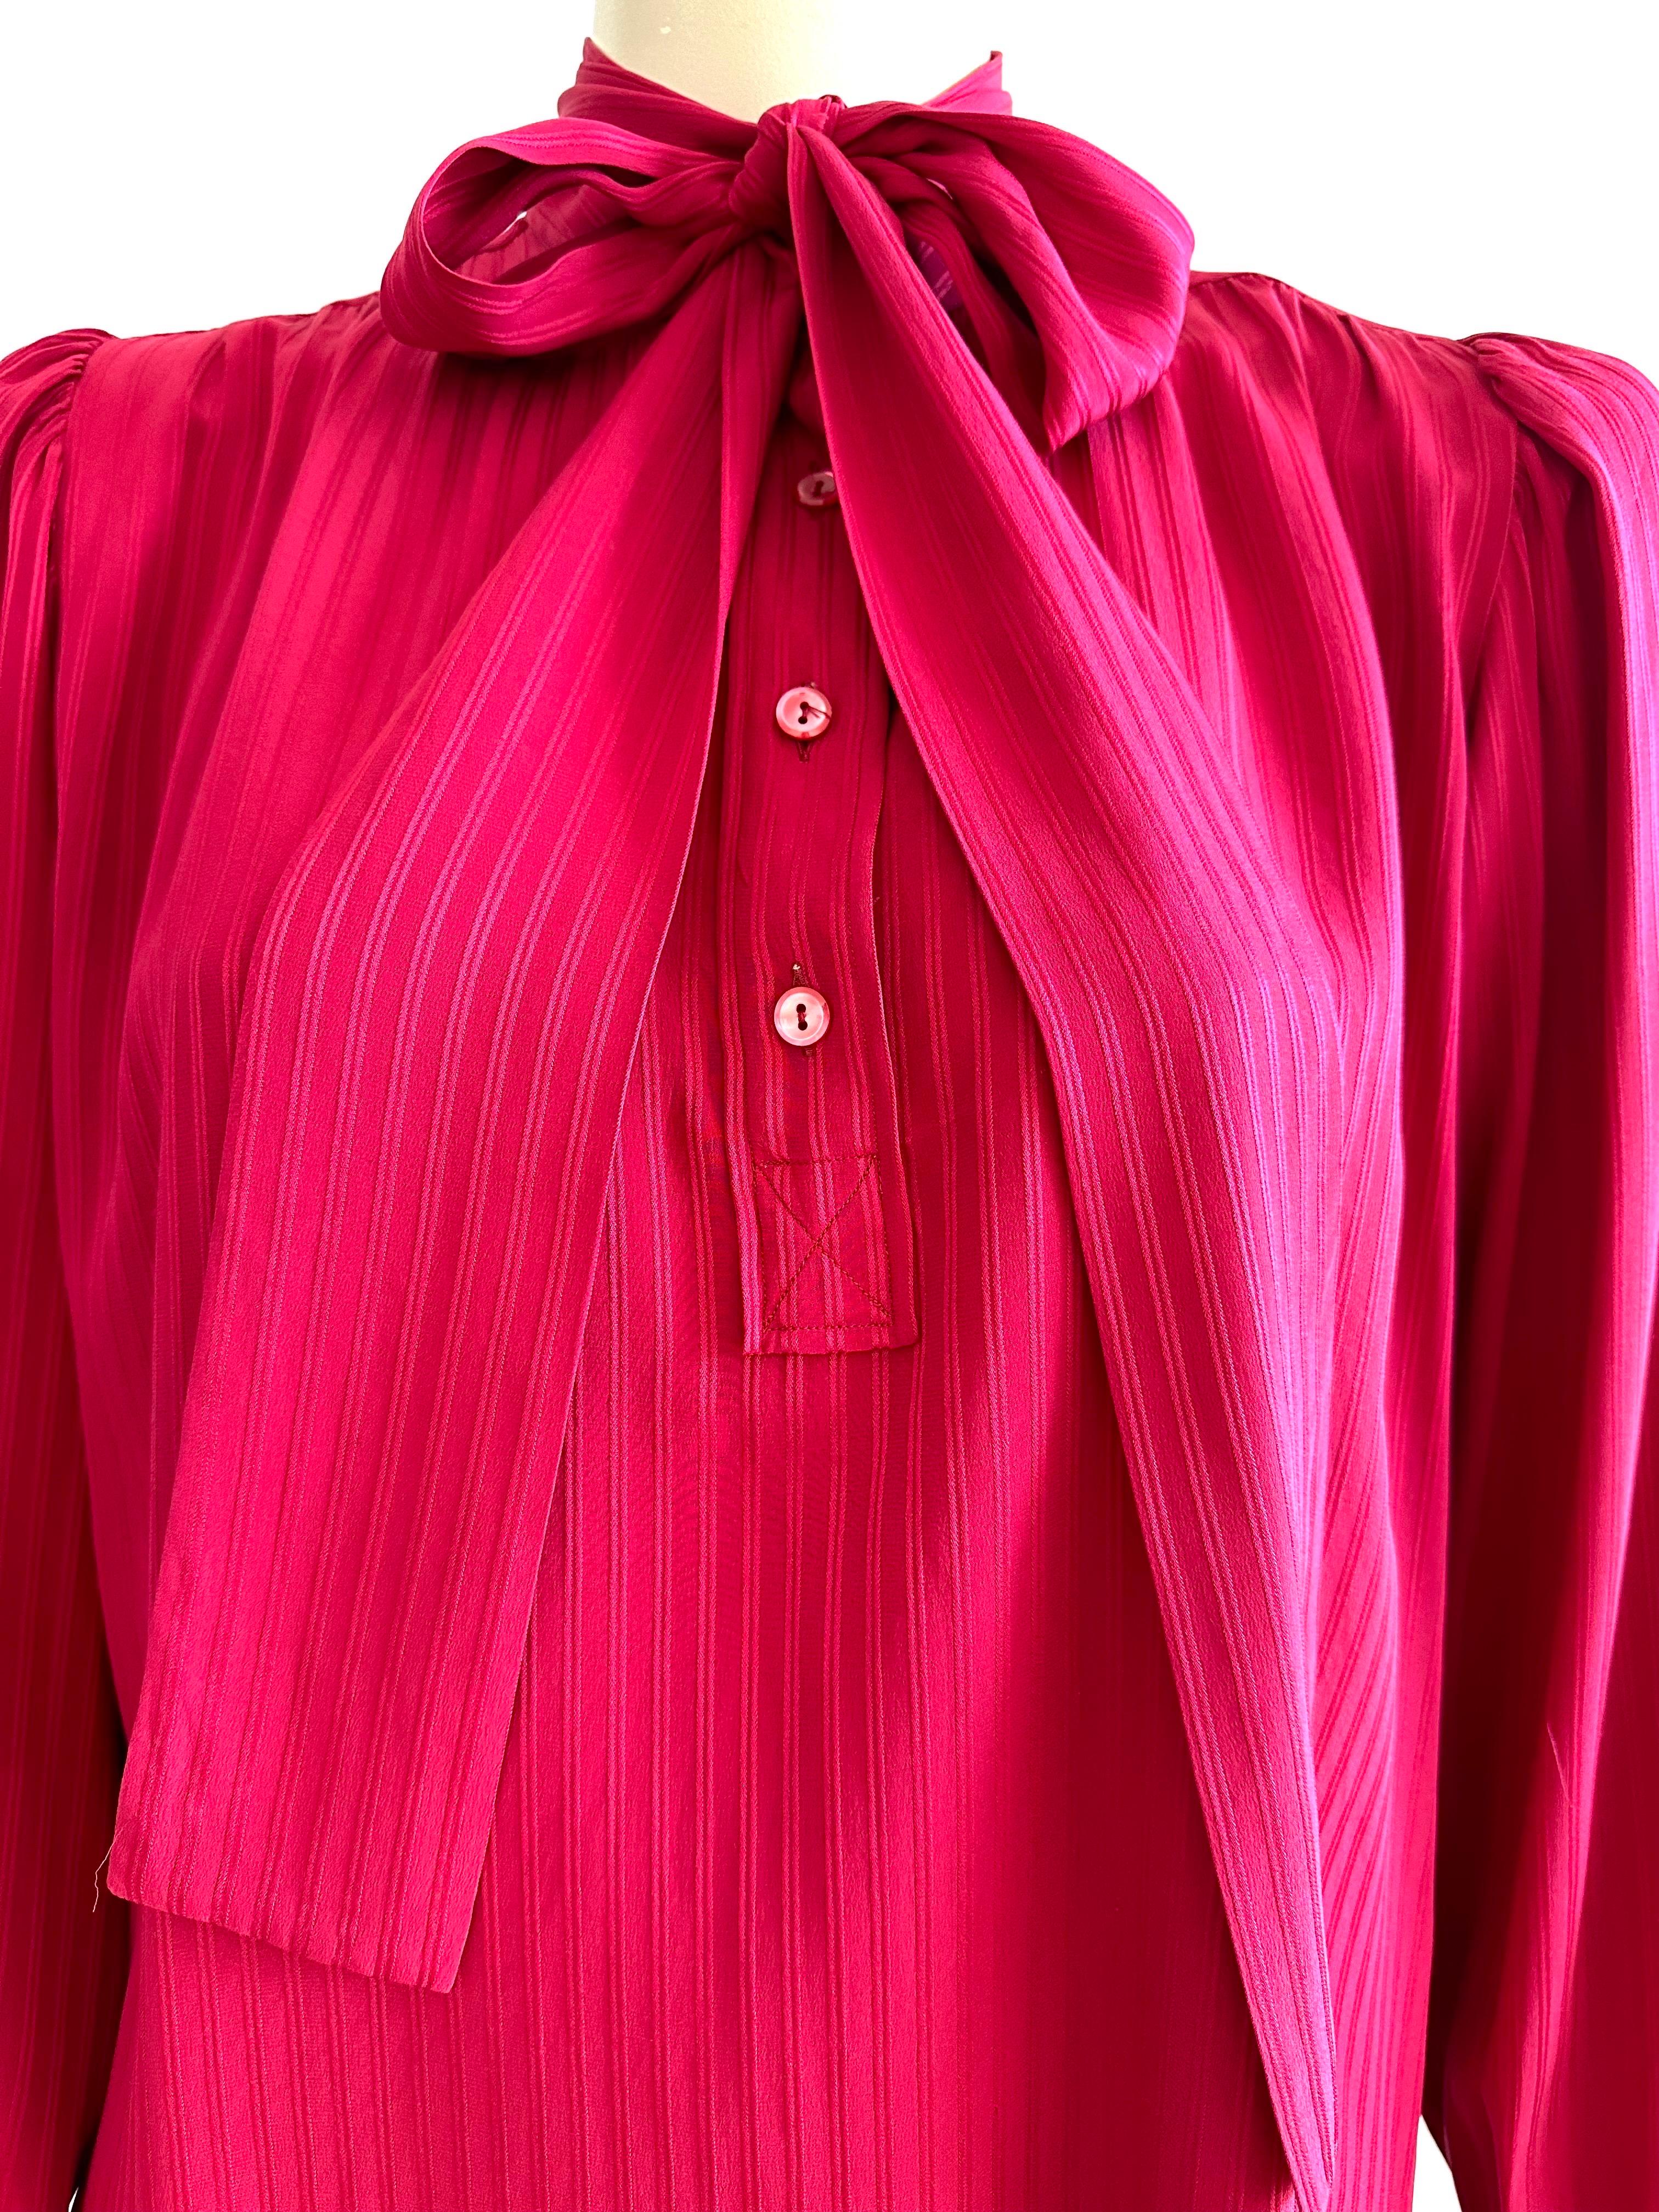 YSL ruby ​​red silk blouse from the 1970s featuring a pretty lavalliere collar with a buttoned opening.
the shoulders and back are slightly gathered.
The sleeves are long and closed with a button at the cuffs.
100% silk and made in france, 
The size